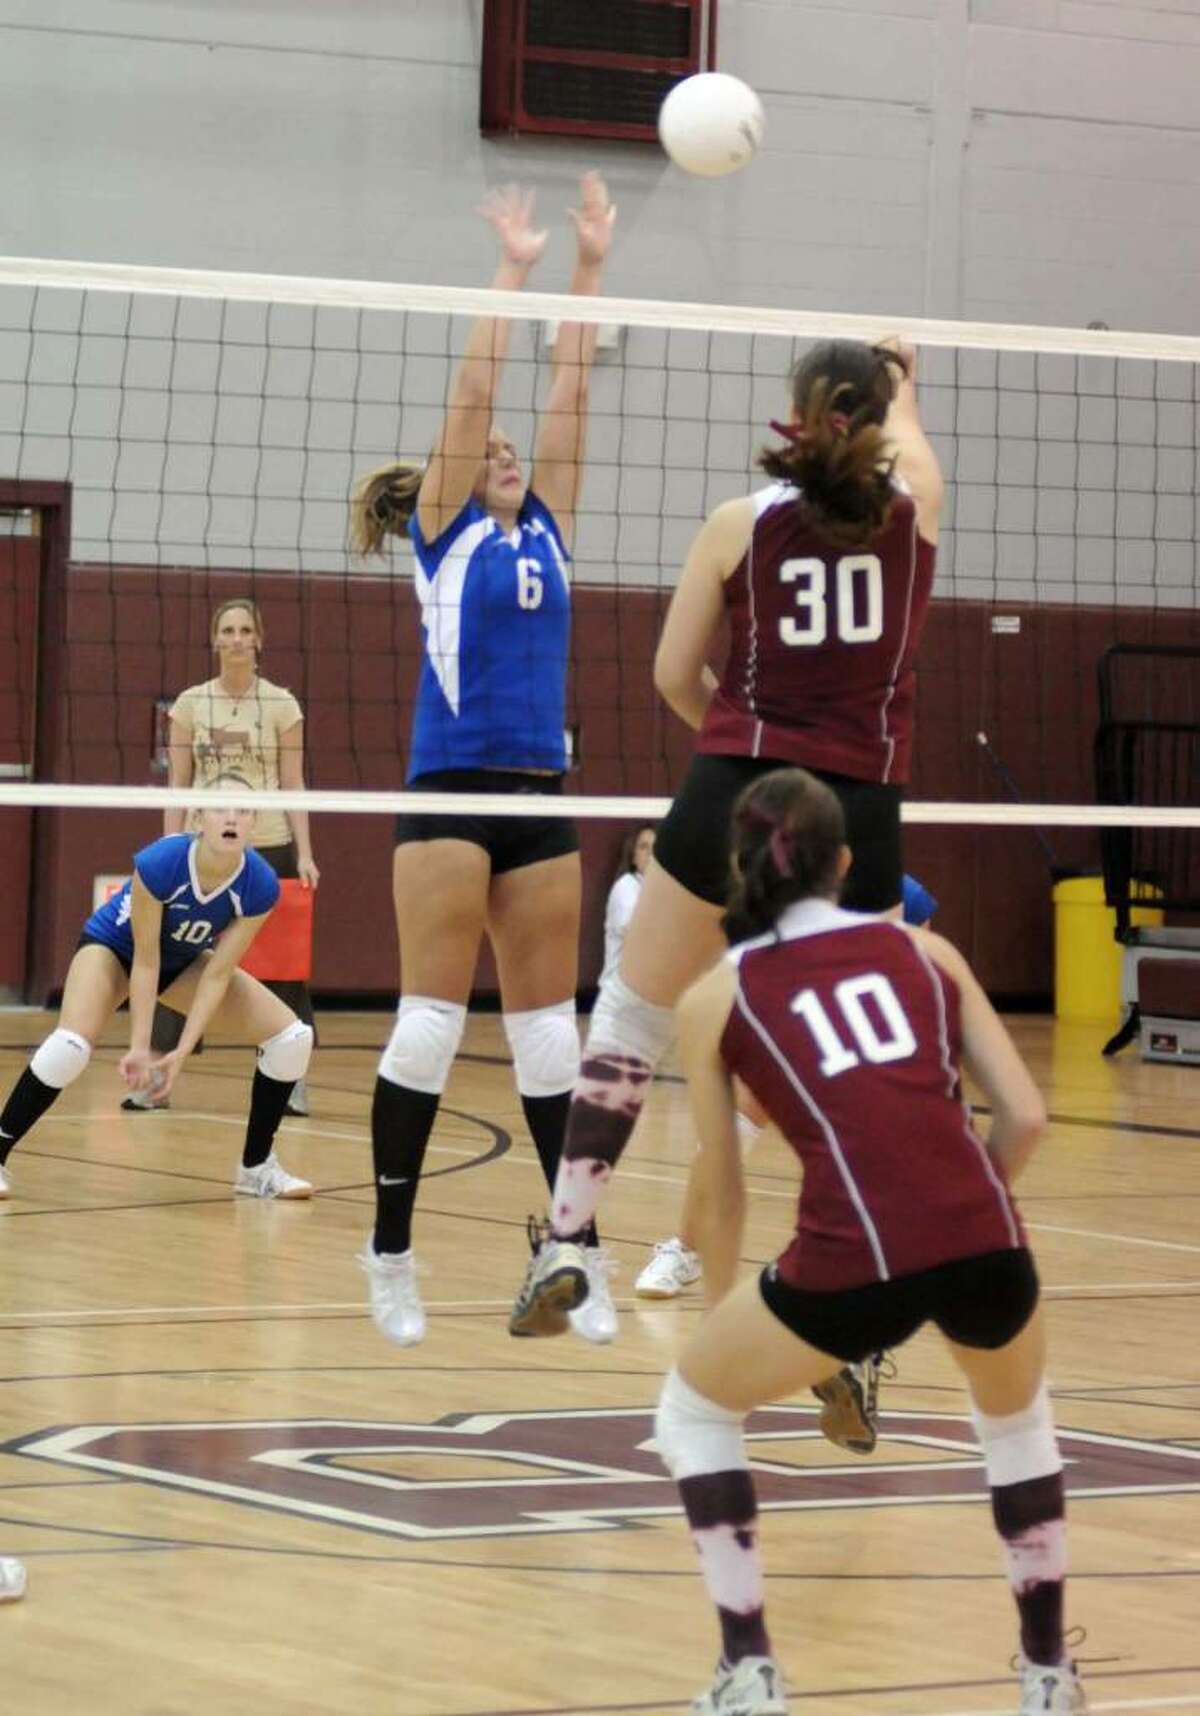 Brookfield's #6, Kathryn Marron reaches to block the ball after Bethel's #30, Madison Ferraro hits it over the net. Brookfield High School vs Bethel High School girls Volley Ball. Tuesday Sept. 29, 2009.